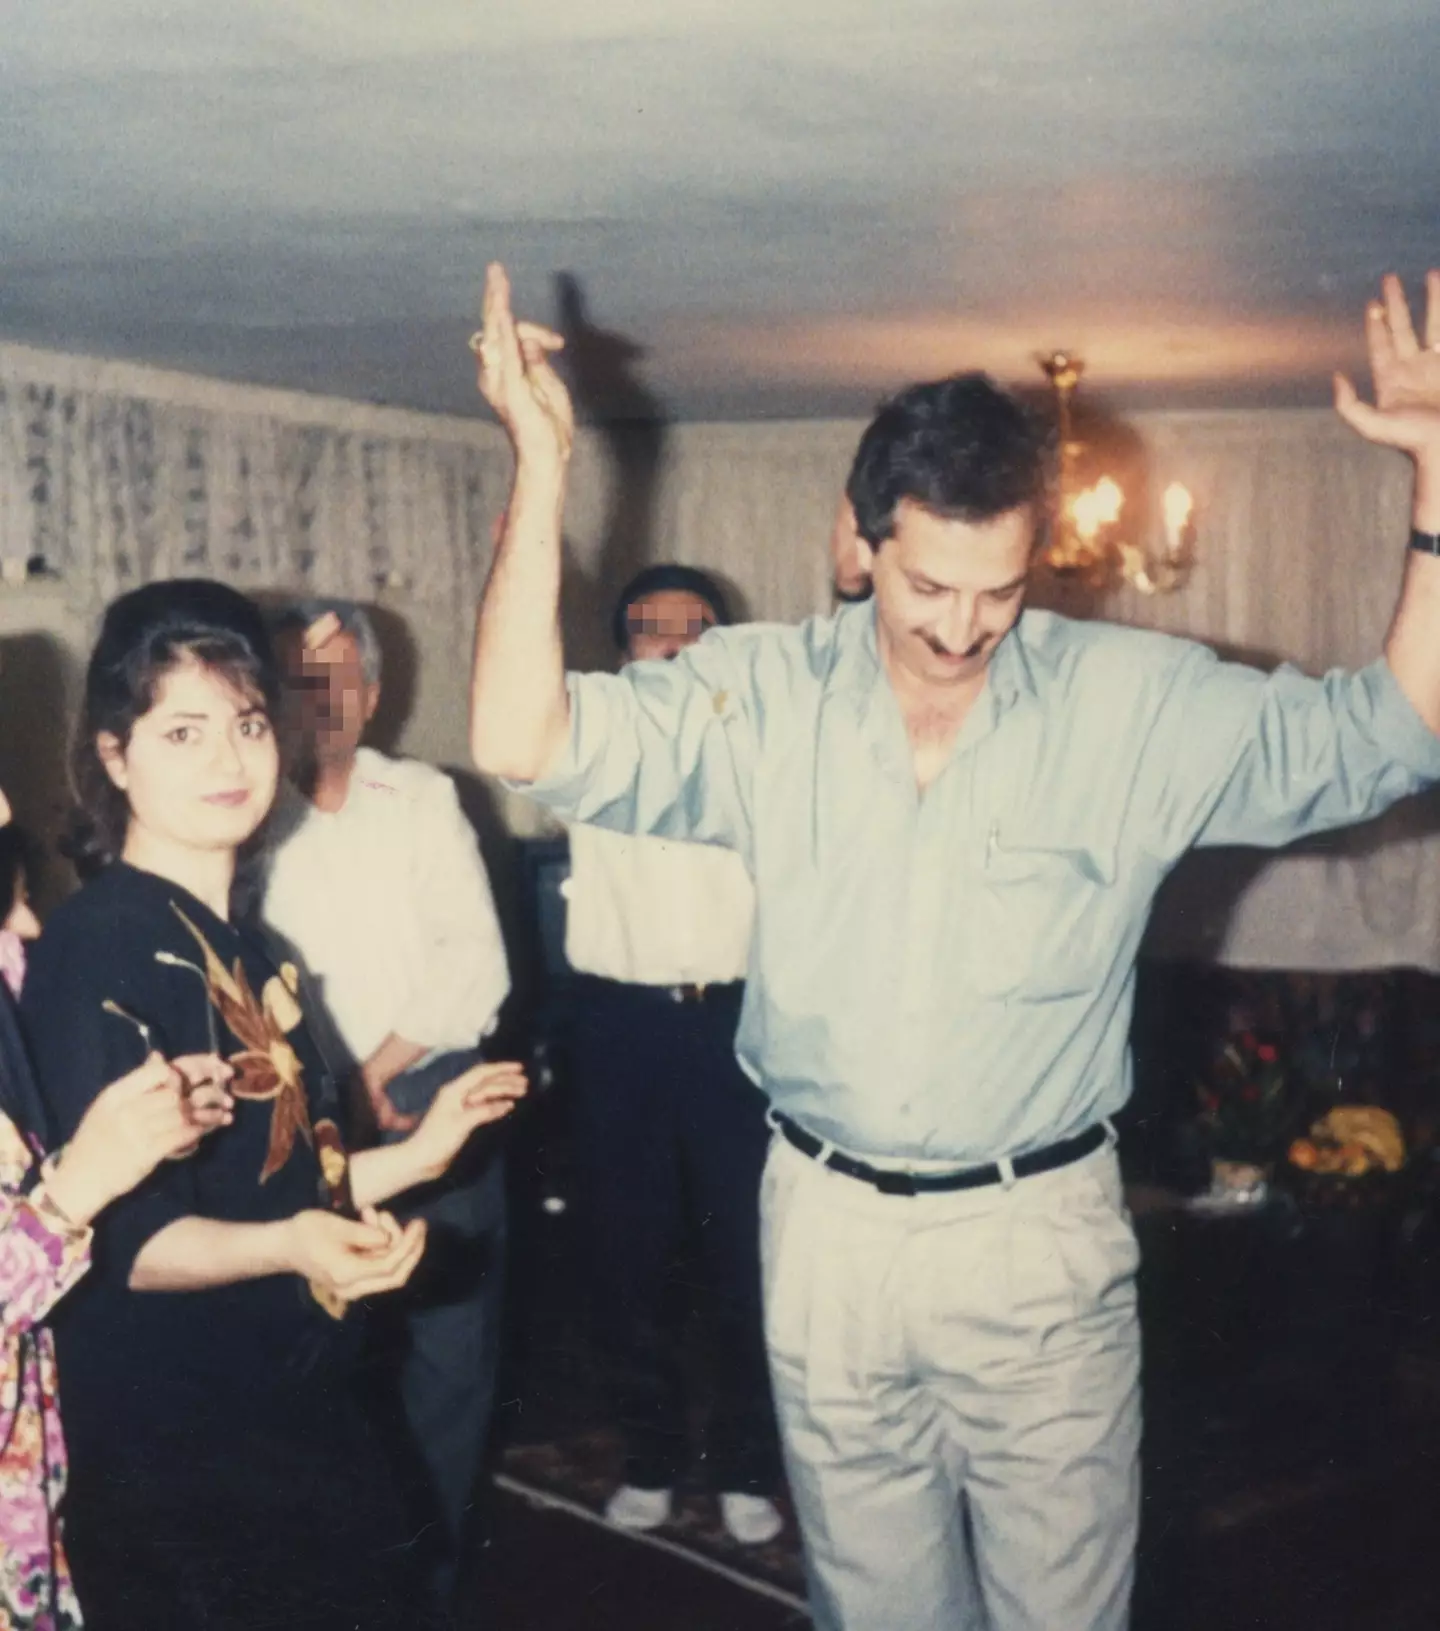 Sahar's parents at a house party. Such gatherings are strictly prohibited by the morality police.